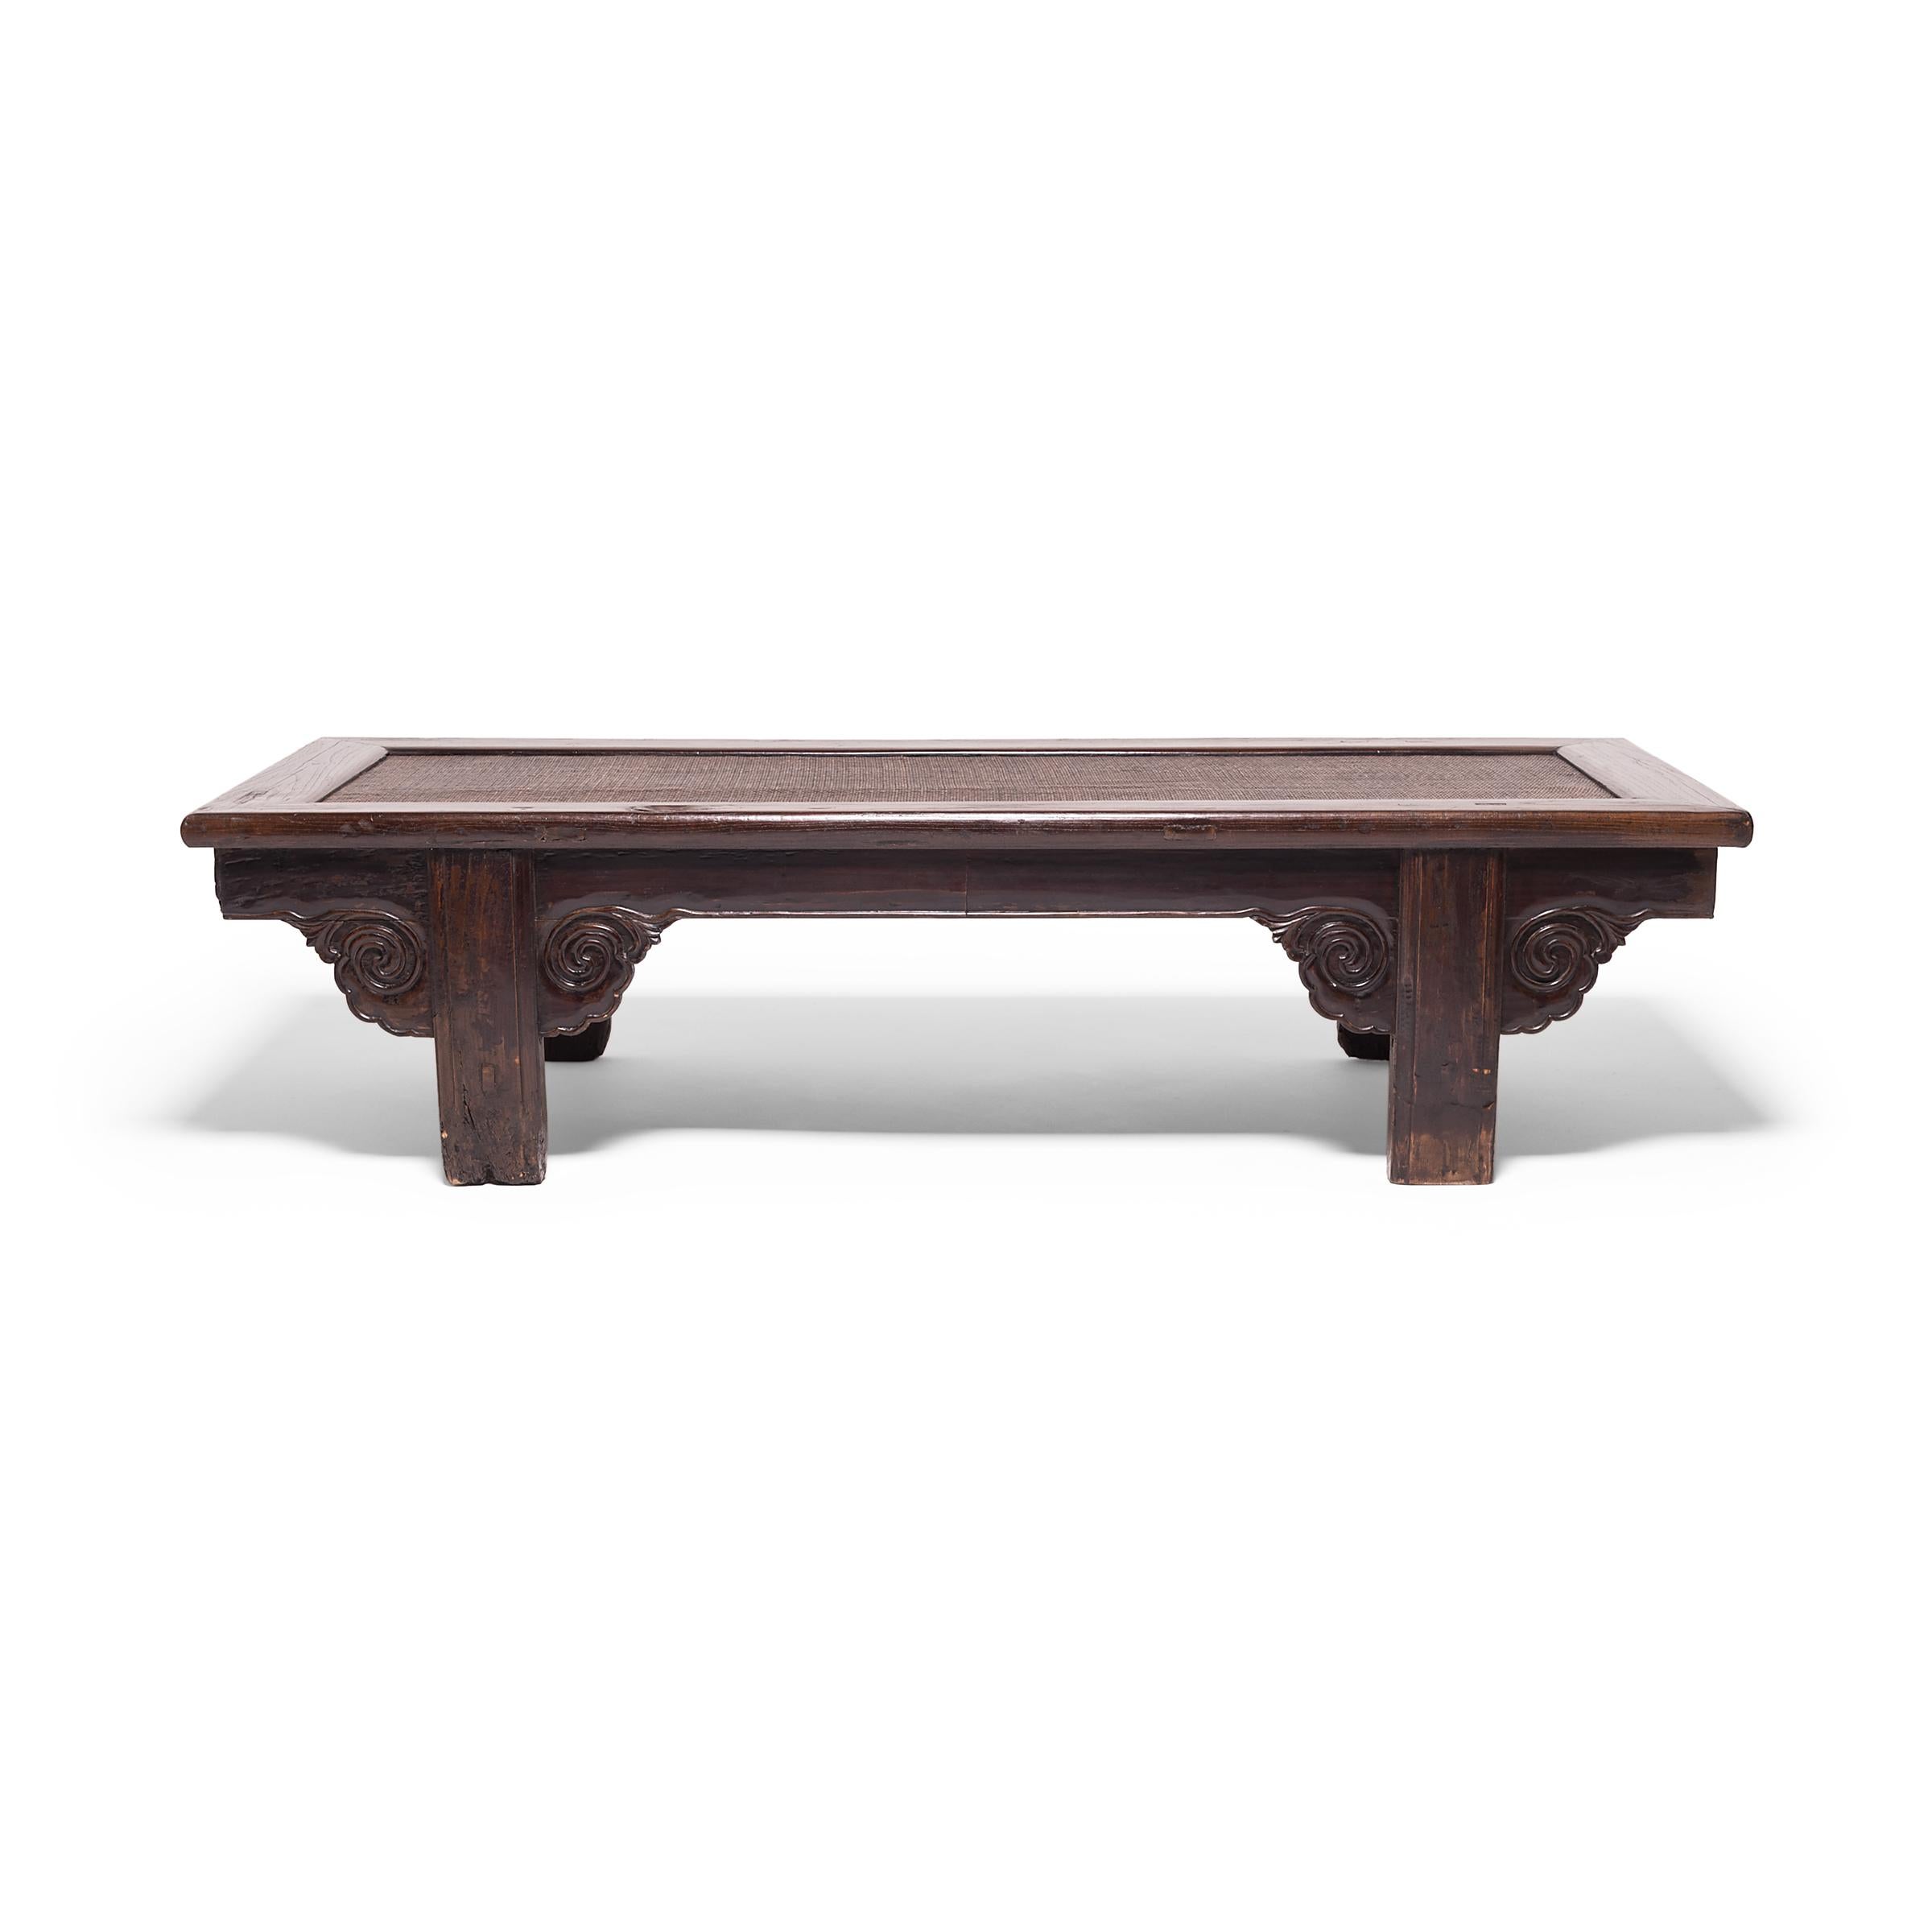 This handsome table is a prime example of traditional Chinese craftsmanship. The frame of the beautifully worn top is lined with a finely woven mat, carved clouds form spandrels on the apron, and the mortise and tenon joinery lend the piece an